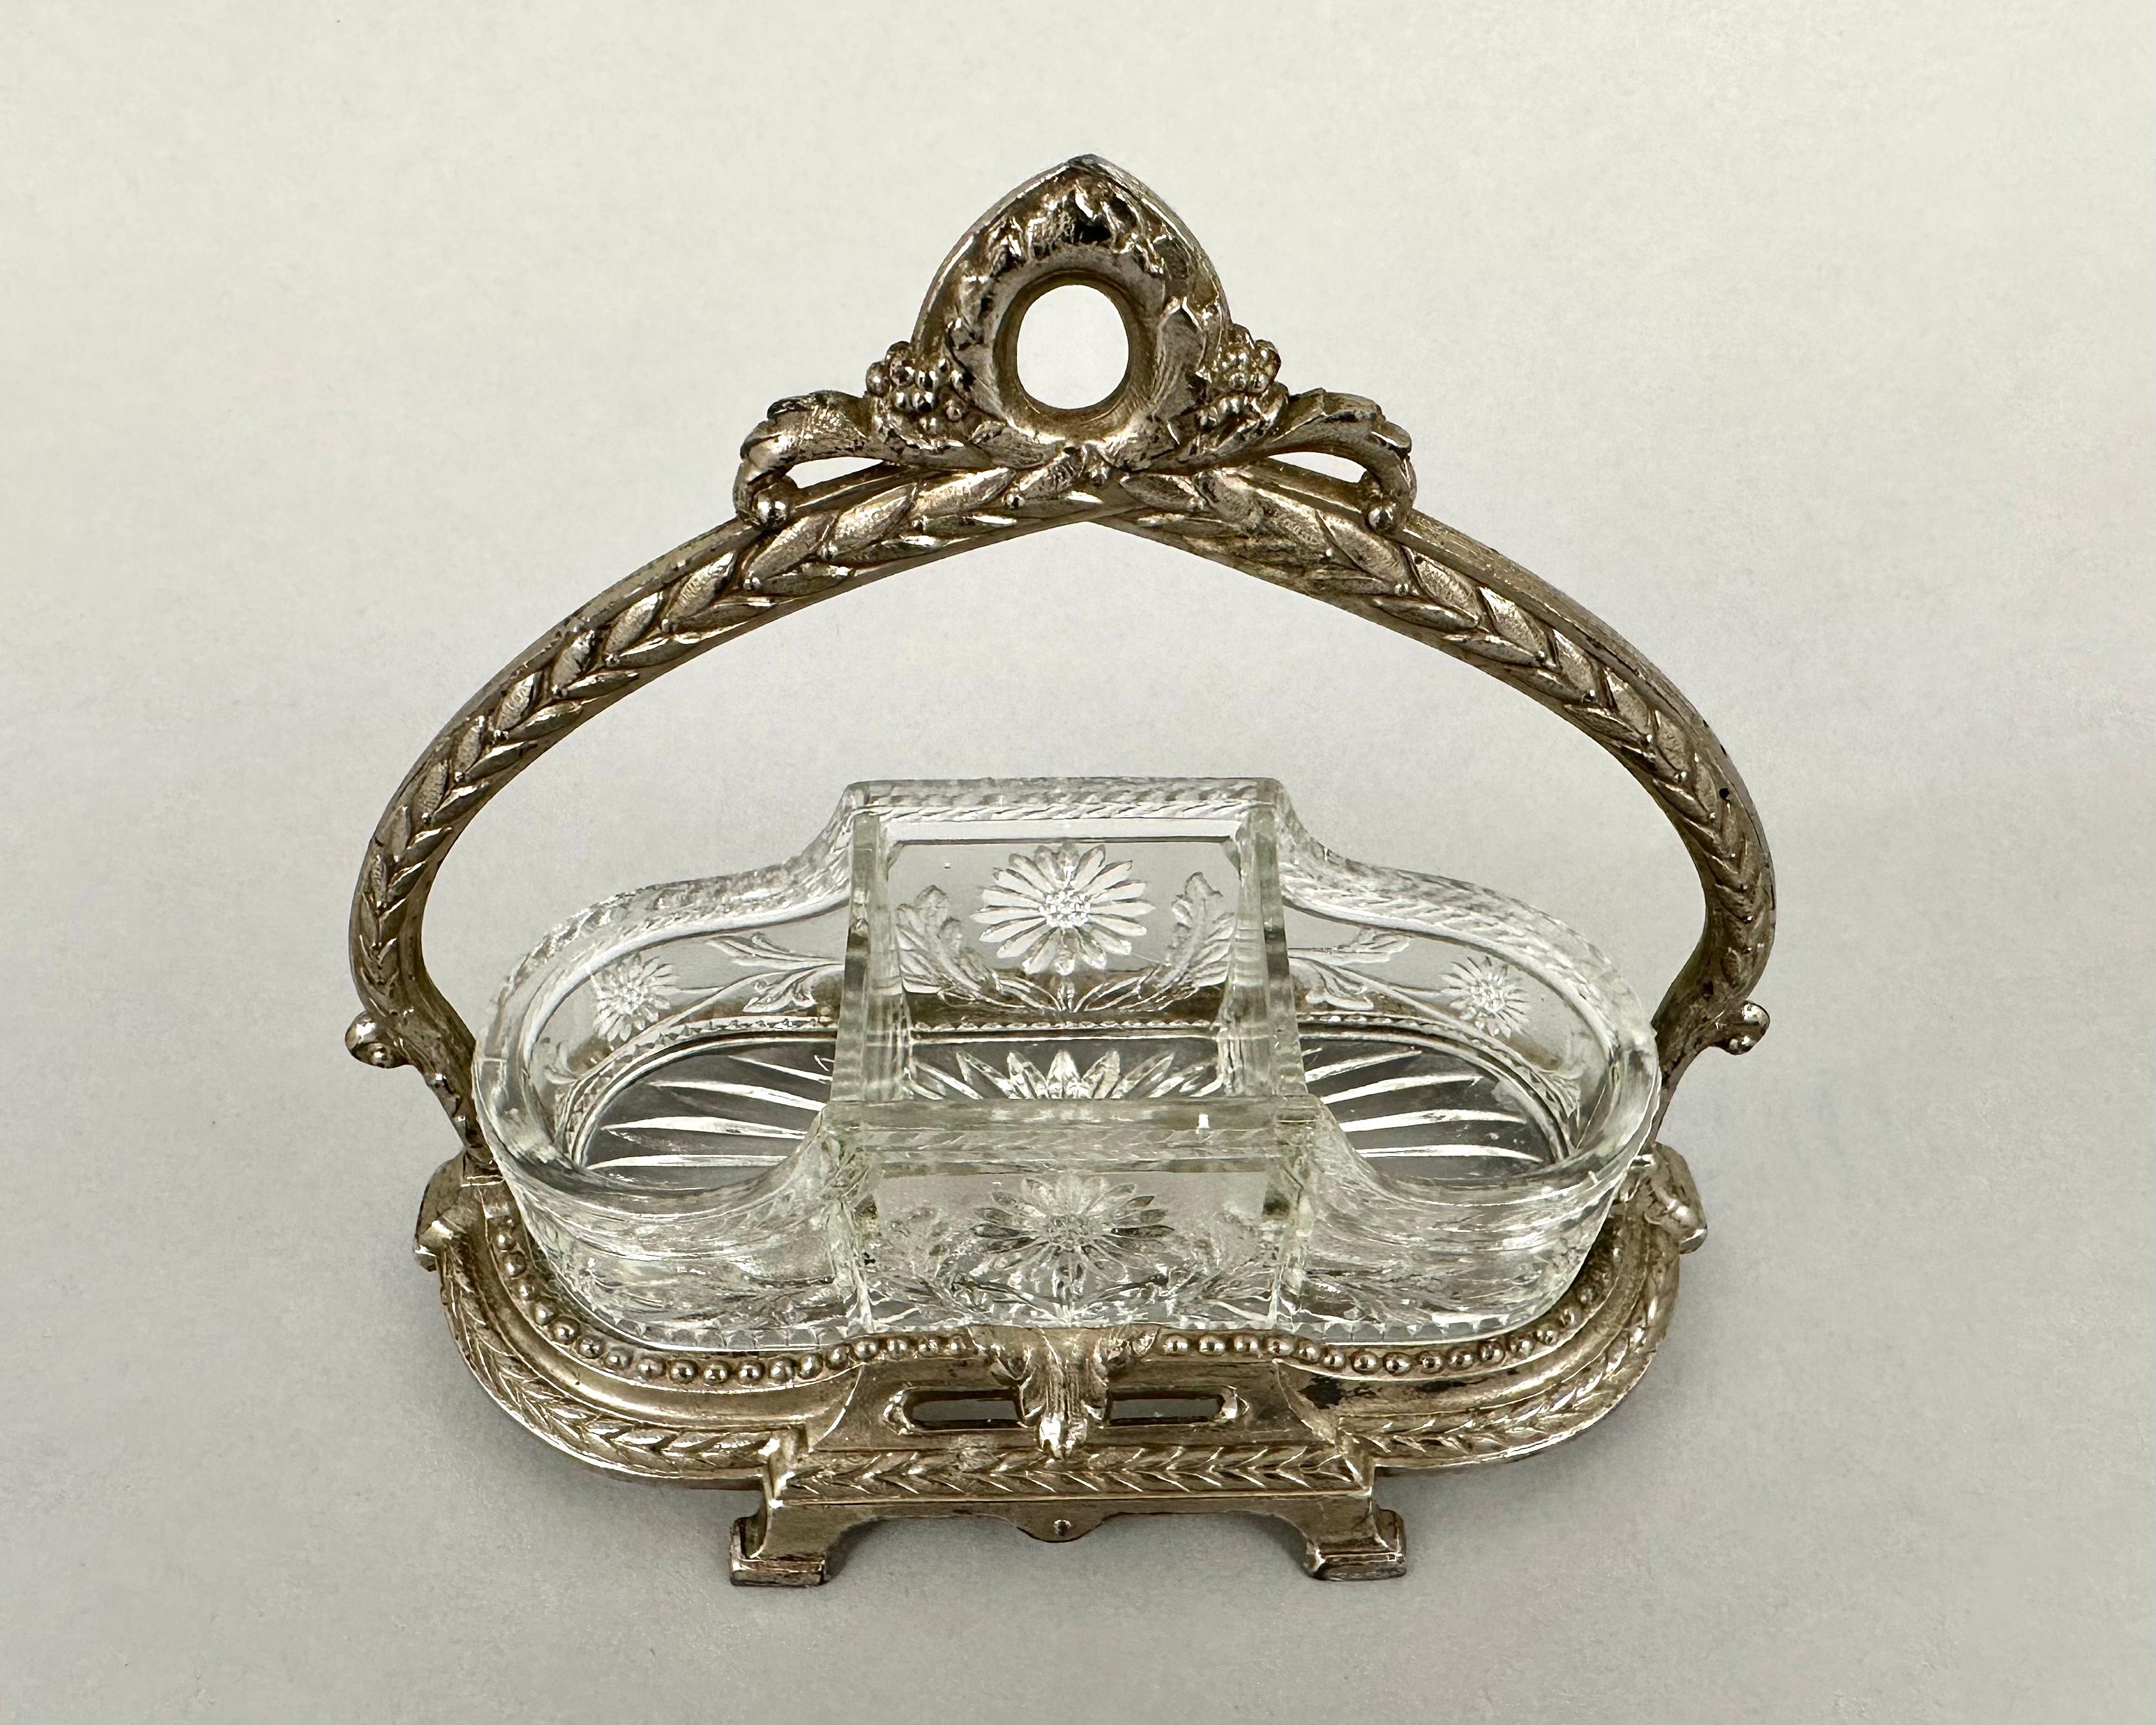 A beautiful antique condiment dish or serving dish.

Made from silver and cut glass in France and dating from circa 1910s.

Condiment caddy set on a silver and glass stand is an excellent solution for convenient and stylish storage of salt and